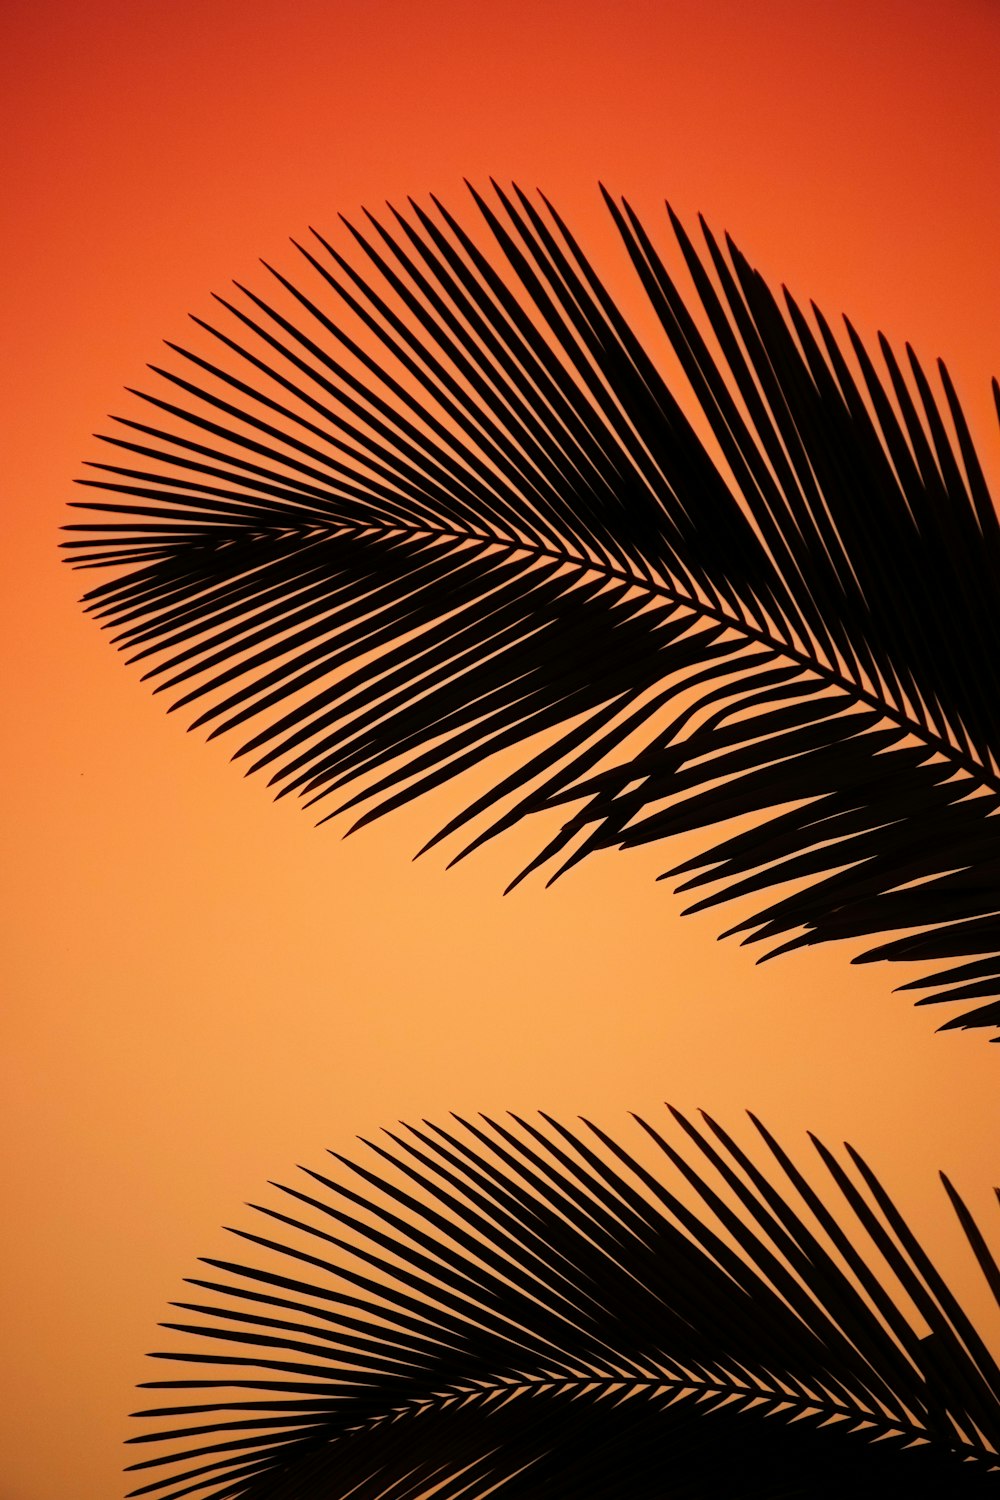 the silhouette of a palm tree against an orange sky